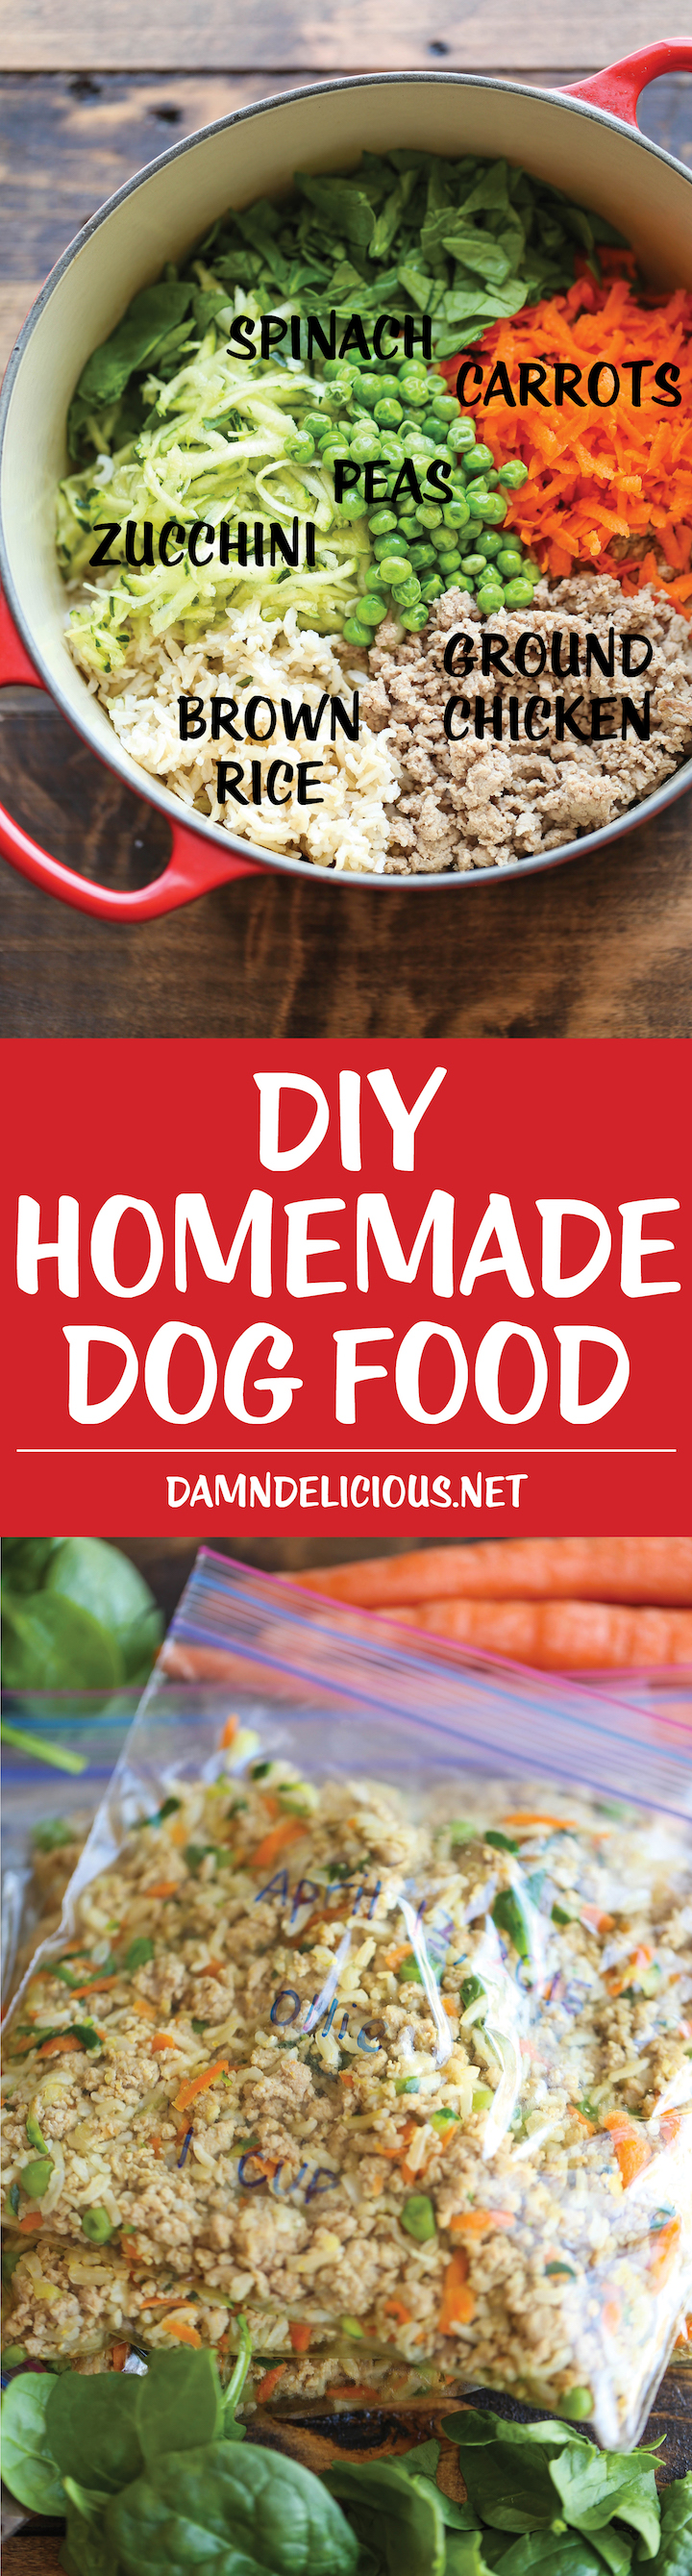 21 Healthy Homemade Dog Food and Treat Recipes Perfect for Your Pup